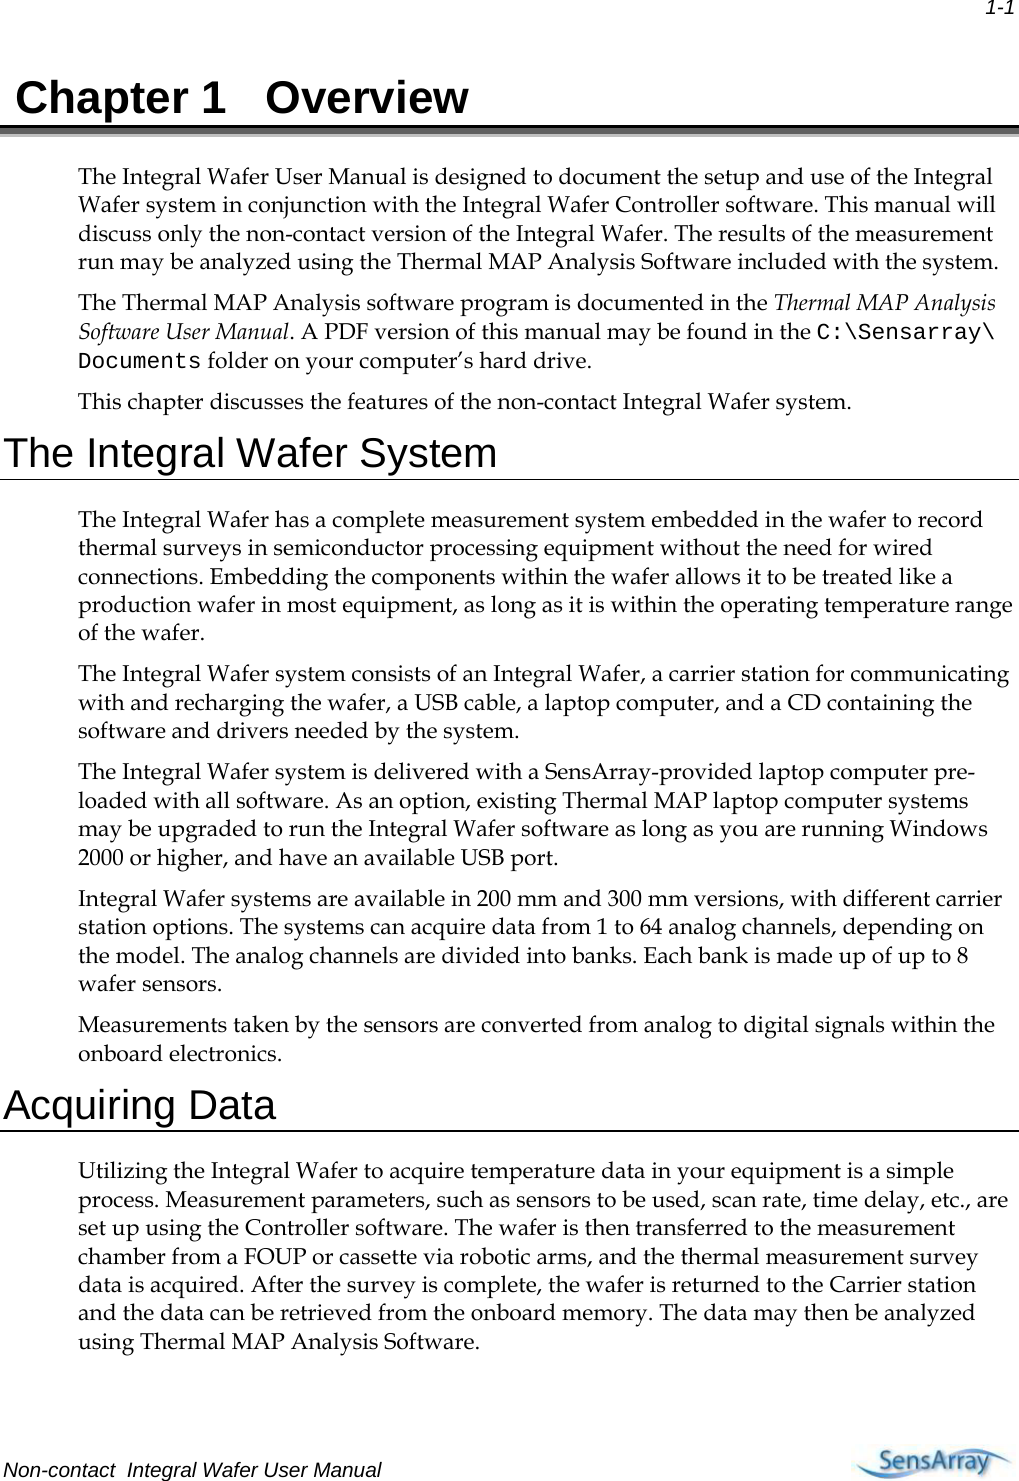  1-1  Chapter 1  Overview The Integral Wafer User Manual is designed to document the setup and use of the Integral Wafer system in conjunction with the Integral Wafer Controller software. This manual will discuss only the non-contact version of the Integral Wafer. The results of the measurement run may be analyzed using the Thermal MAP Analysis Software included with the system. The Thermal MAP Analysis software program is documented in the Thermal MAP Analysis Software User Manual. A PDF version of this manual may be found in the C:\Sensarray\ Documents folder on your computer’s hard drive. This chapter discusses the features of the non-contact Integral Wafer system. The Integral Wafer System The Integral Wafer has a complete measurement system embedded in the wafer to record thermal surveys in semiconductor processing equipment without the need for wired connections. Embedding the components within the wafer allows it to be treated like a production wafer in most equipment, as long as it is within the operating temperature range of the wafer.  The Integral Wafer system consists of an Integral Wafer, a carrier station for communicating with and recharging the wafer, a USB cable, a laptop computer, and a CD containing the software and drivers needed by the system.  The Integral Wafer system is delivered with a SensArray-provided laptop computer pre-loaded with all software. As an option, existing Thermal MAP laptop computer systems may be upgraded to run the Integral Wafer software as long as you are running Windows 2000 or higher, and have an available USB port. Integral Wafer systems are available in 200 mm and 300 mm versions, with different carrier station options. The systems can acquire data from 1 to 64 analog channels, depending on the model. The analog channels are divided into banks. Each bank is made up of up to 8 wafer sensors. Measurements taken by the sensors are converted from analog to digital signals within the onboard electronics.  Acquiring Data Utilizing the Integral Wafer to acquire temperature data in your equipment is a simple process. Measurement parameters, such as sensors to be used, scan rate, time delay, etc., are set up using the Controller software. The wafer is then transferred to the measurement chamber from a FOUP or cassette via robotic arms, and the thermal measurement survey data is acquired. After the survey is complete, the wafer is returned to the Carrier station and the data can be retrieved from the onboard memory. The data may then be analyzed using Thermal MAP Analysis Software. Non-contact  Integral Wafer User Manual     